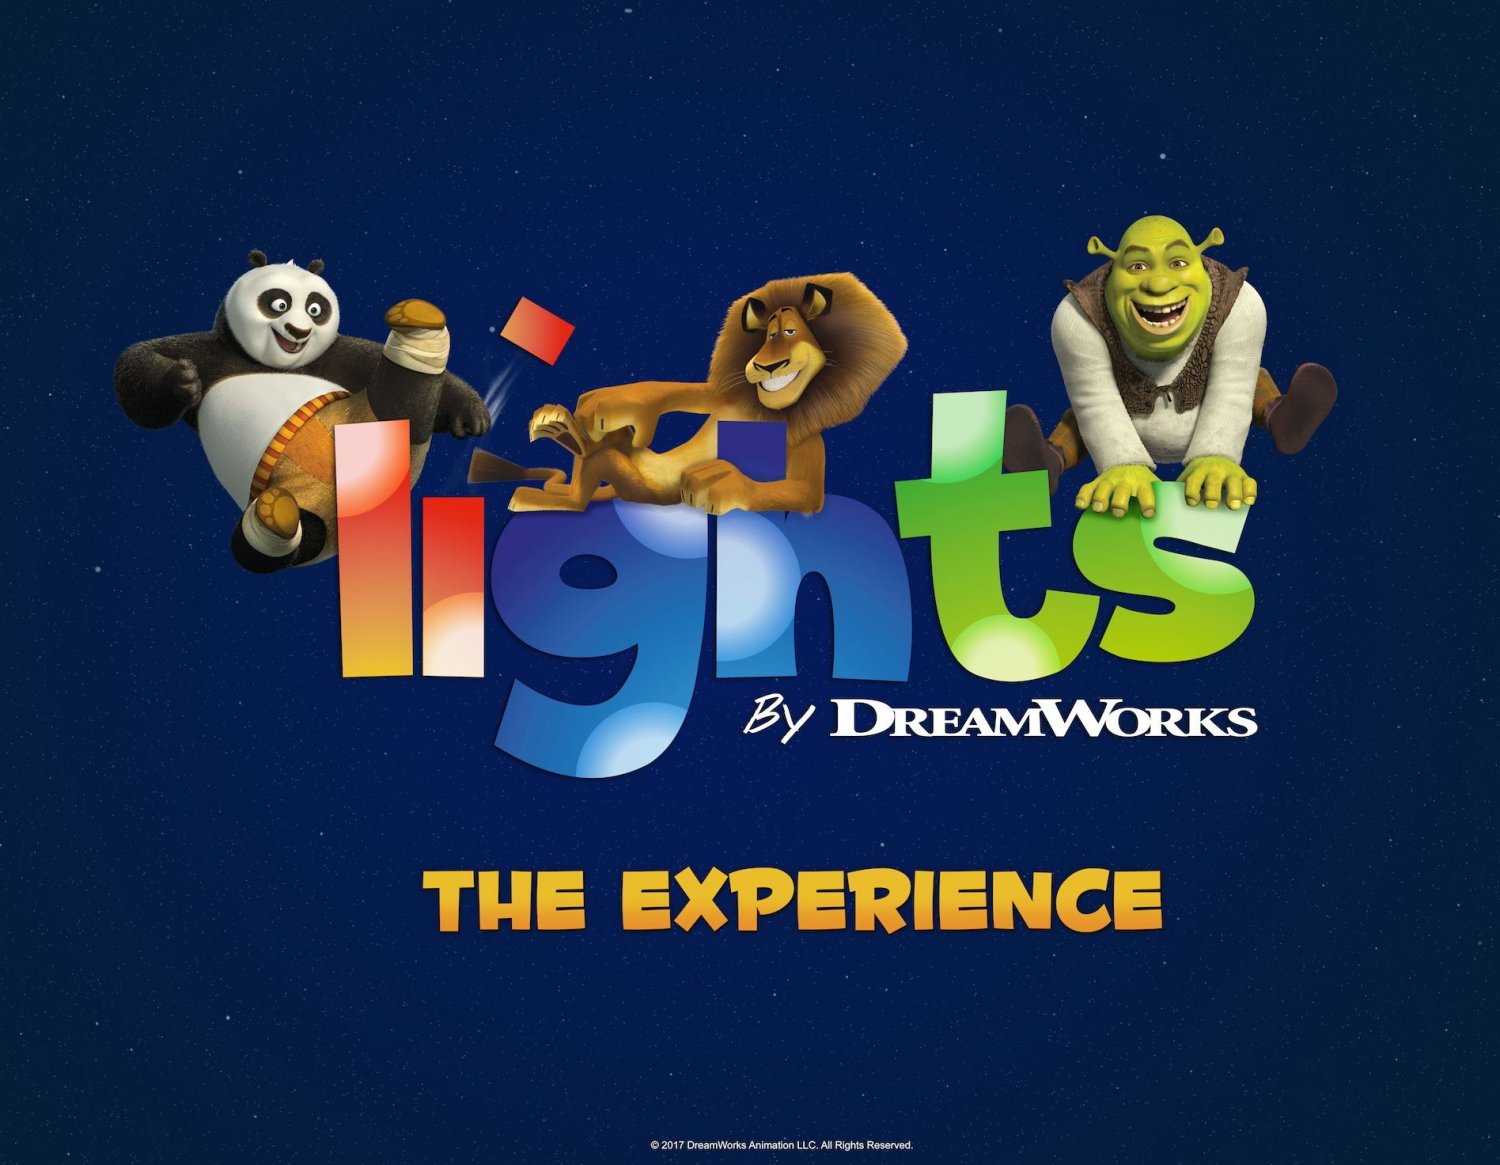 Lights by Dreamworks